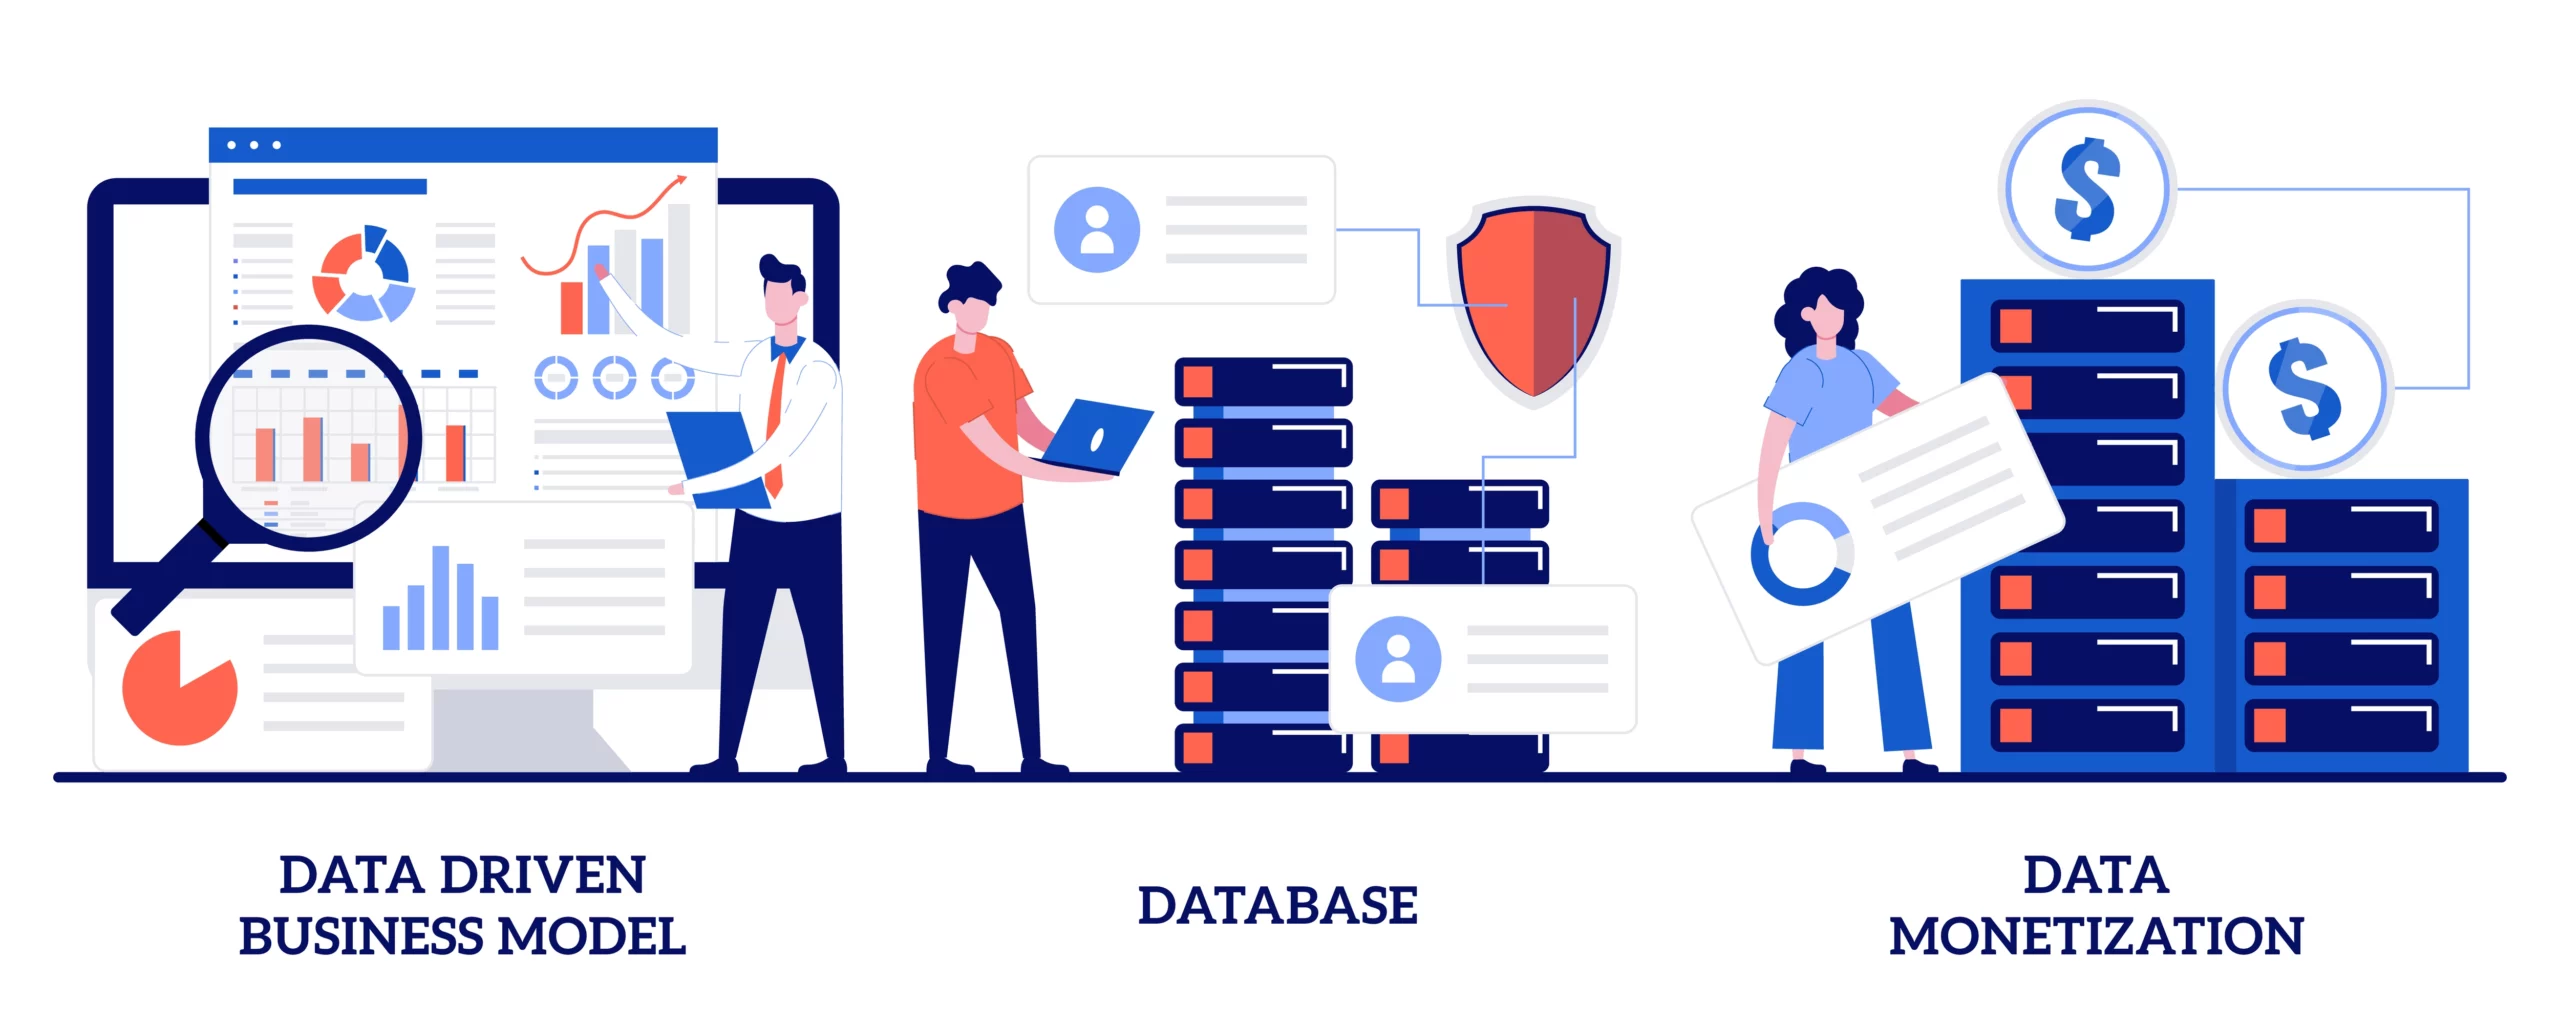 Data driven property management, database, data monetization concept with tiny people. Data business strategy vector illustration set. Decision making, information storage, analysis service metaphor.